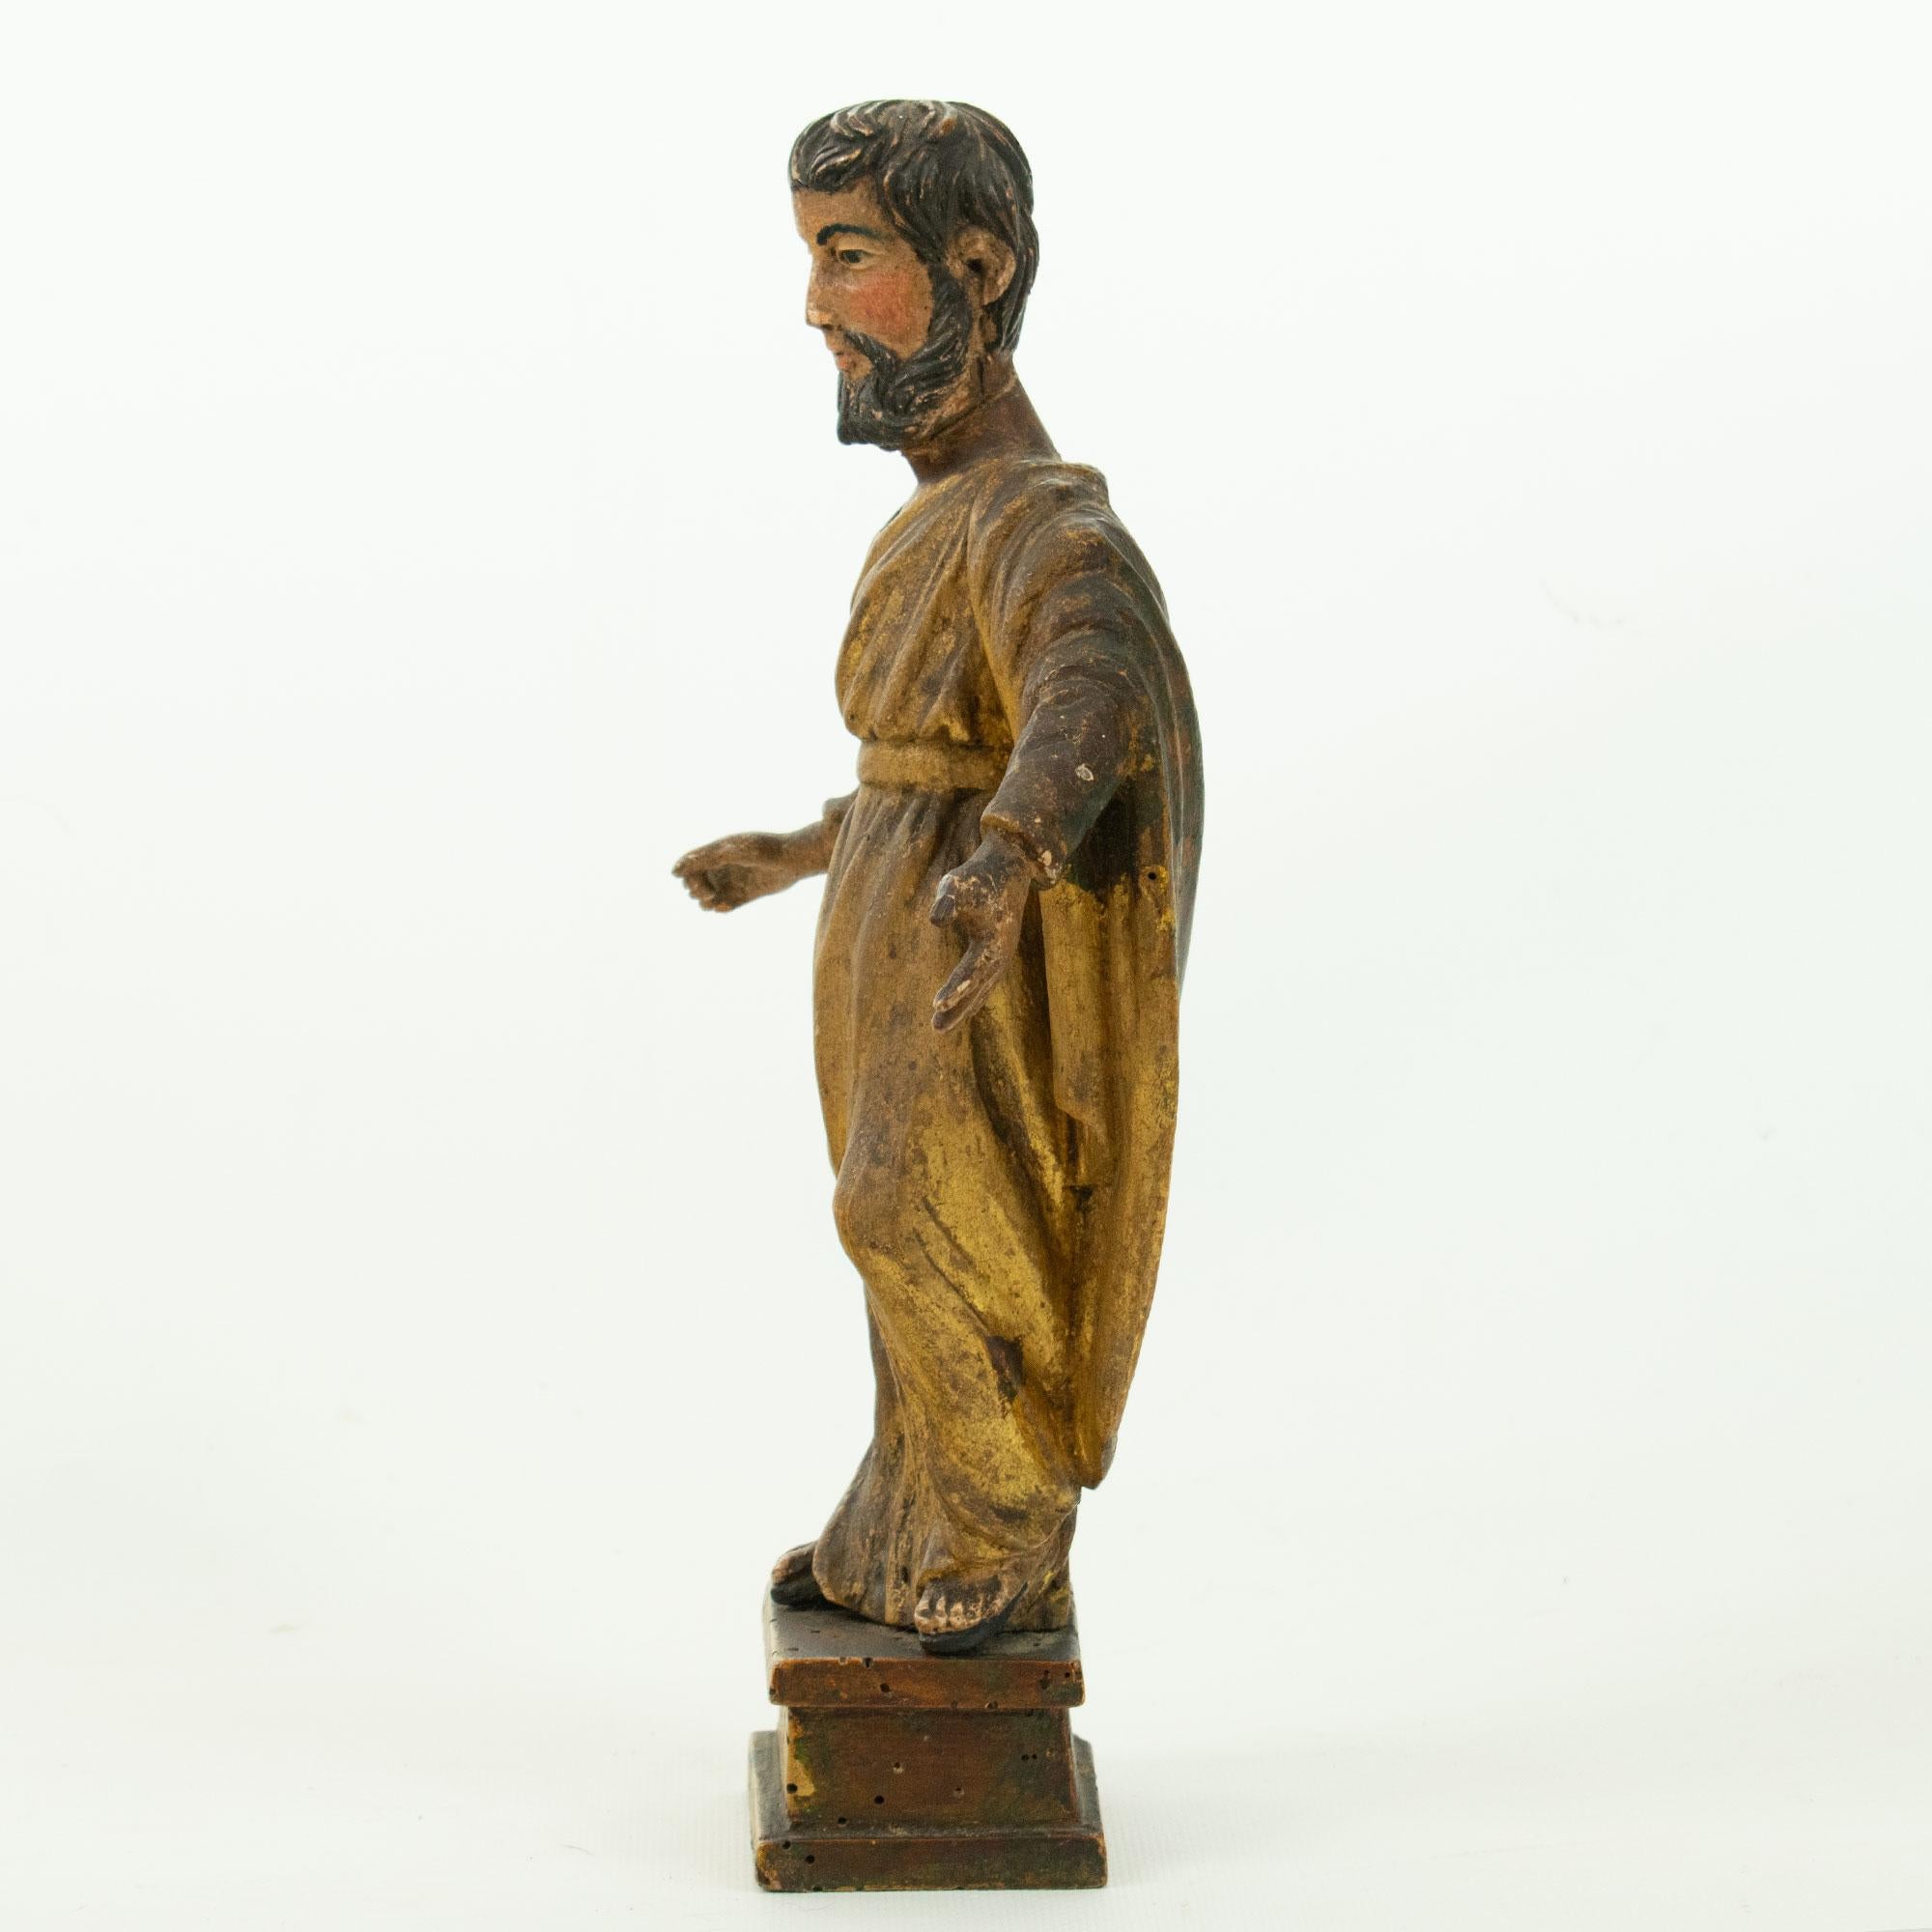 SAINT PAUL: Statuette in carved and gilded polychrome wood,
Late 18th century.  Saint Paul, also known as the Apostle Paul, was an important figure in early Christianity and is often depicted in various forms of religious art.
Height: 29.5cm
The